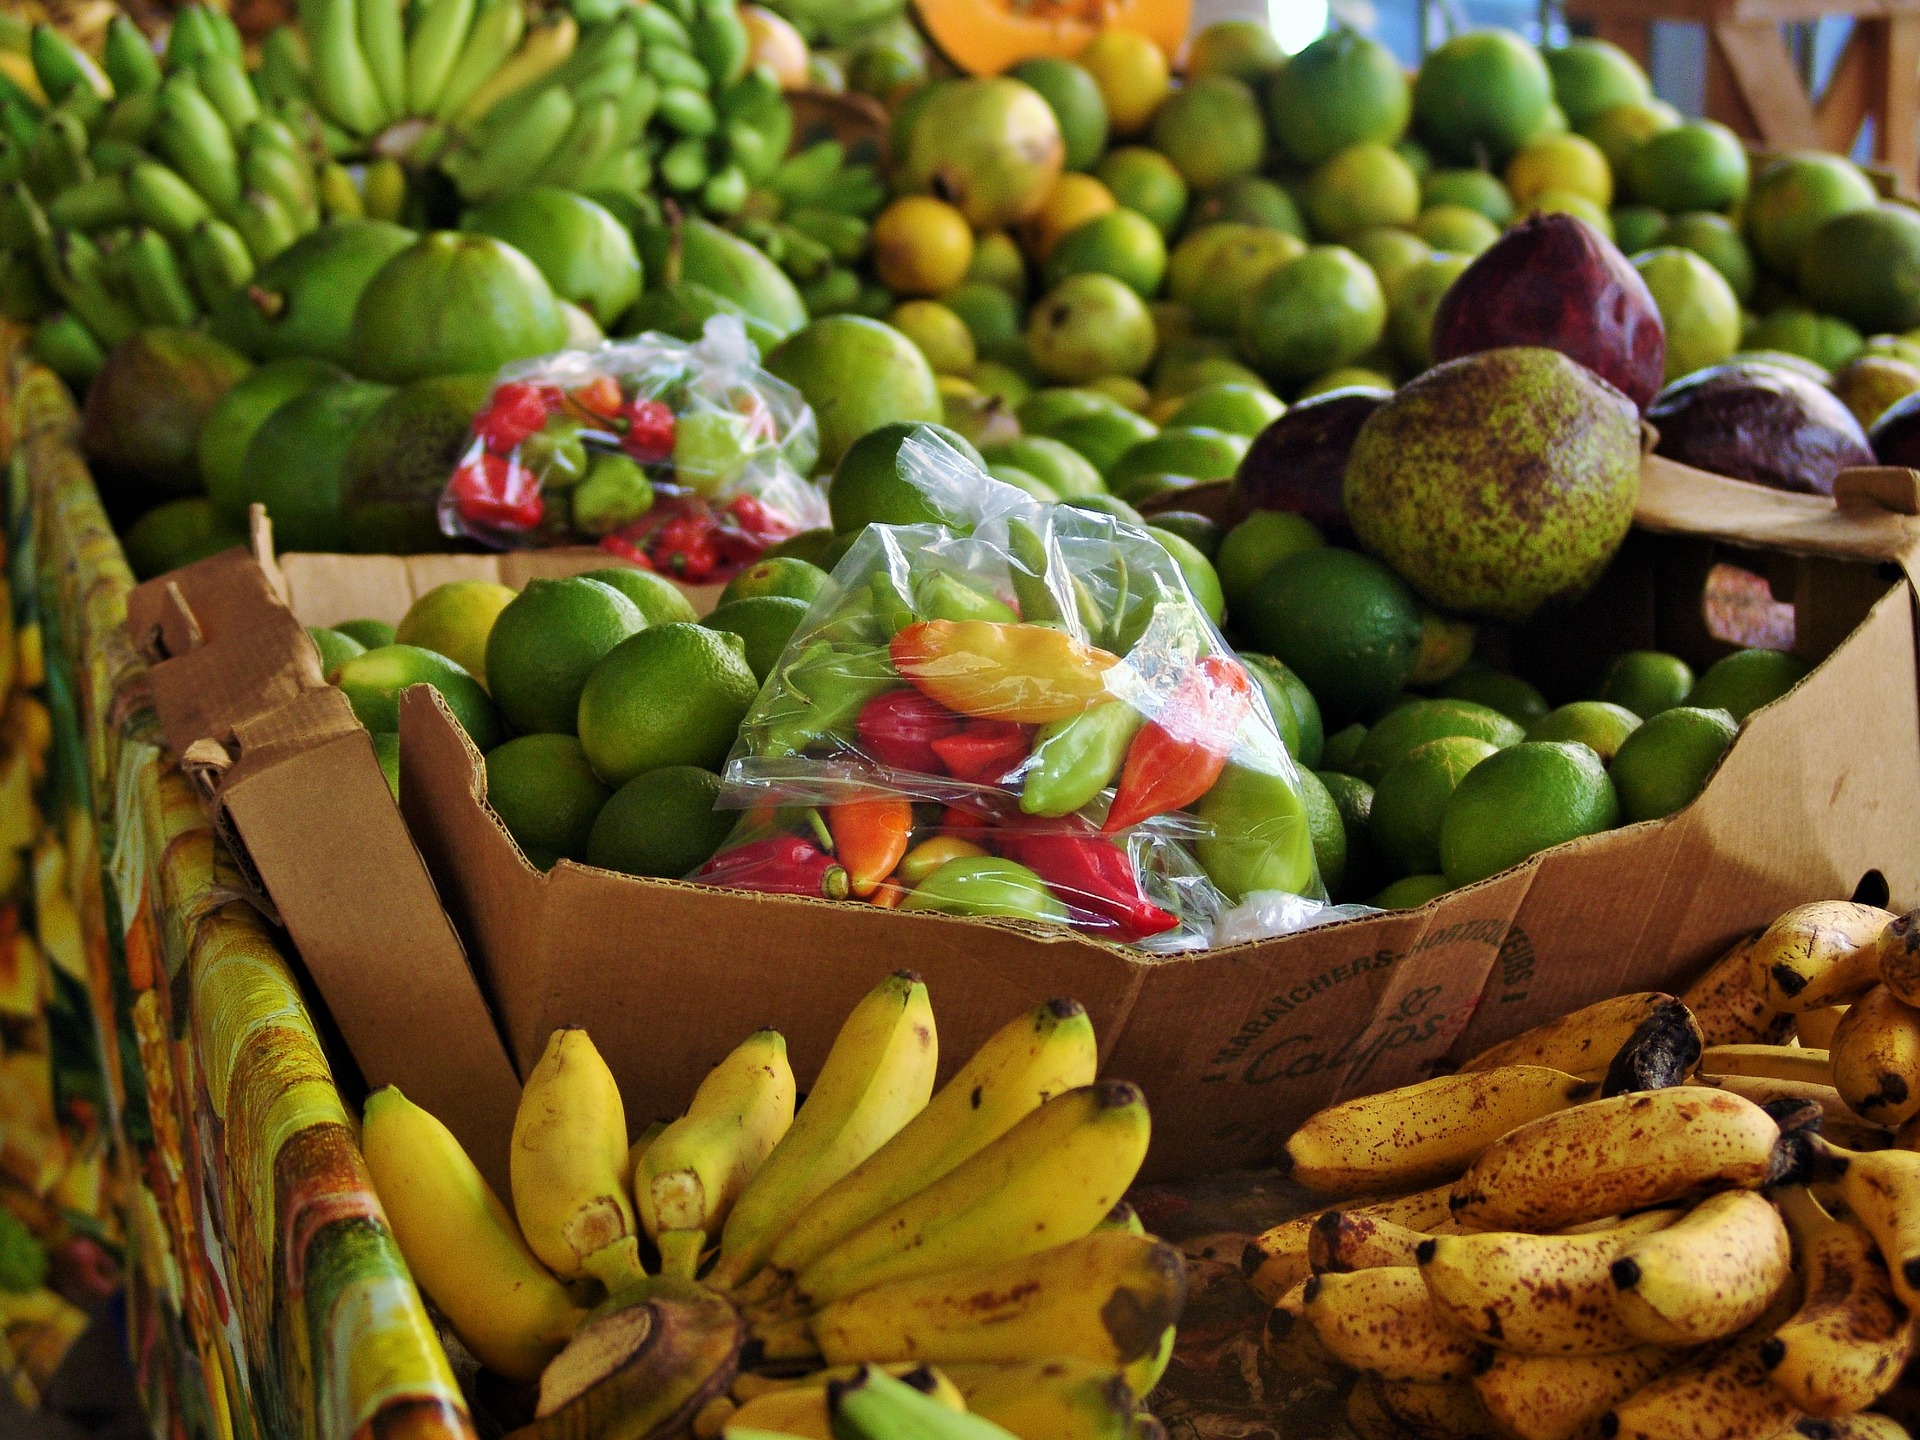 Agritourism - Fruit market in the Caribbean